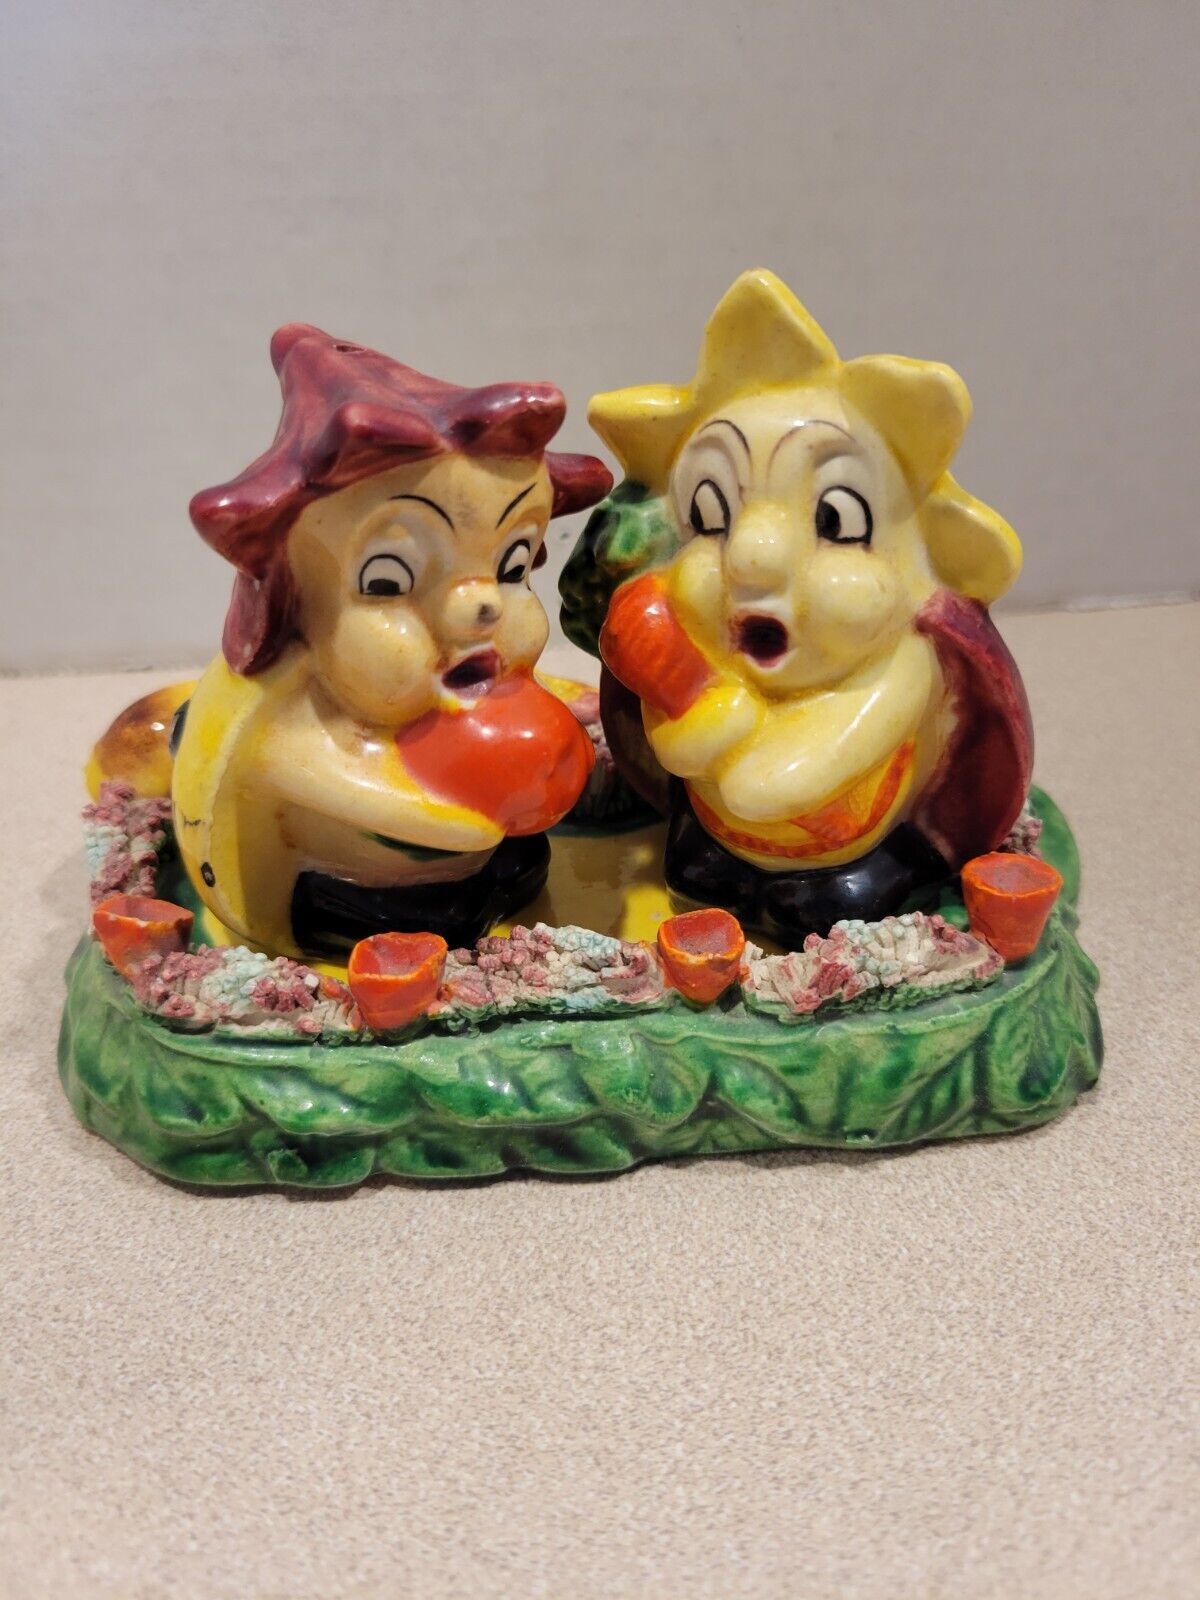 Rare Anthropomorphic Vintage Bug Salt And Pepper Shakers On Ceramic Tray